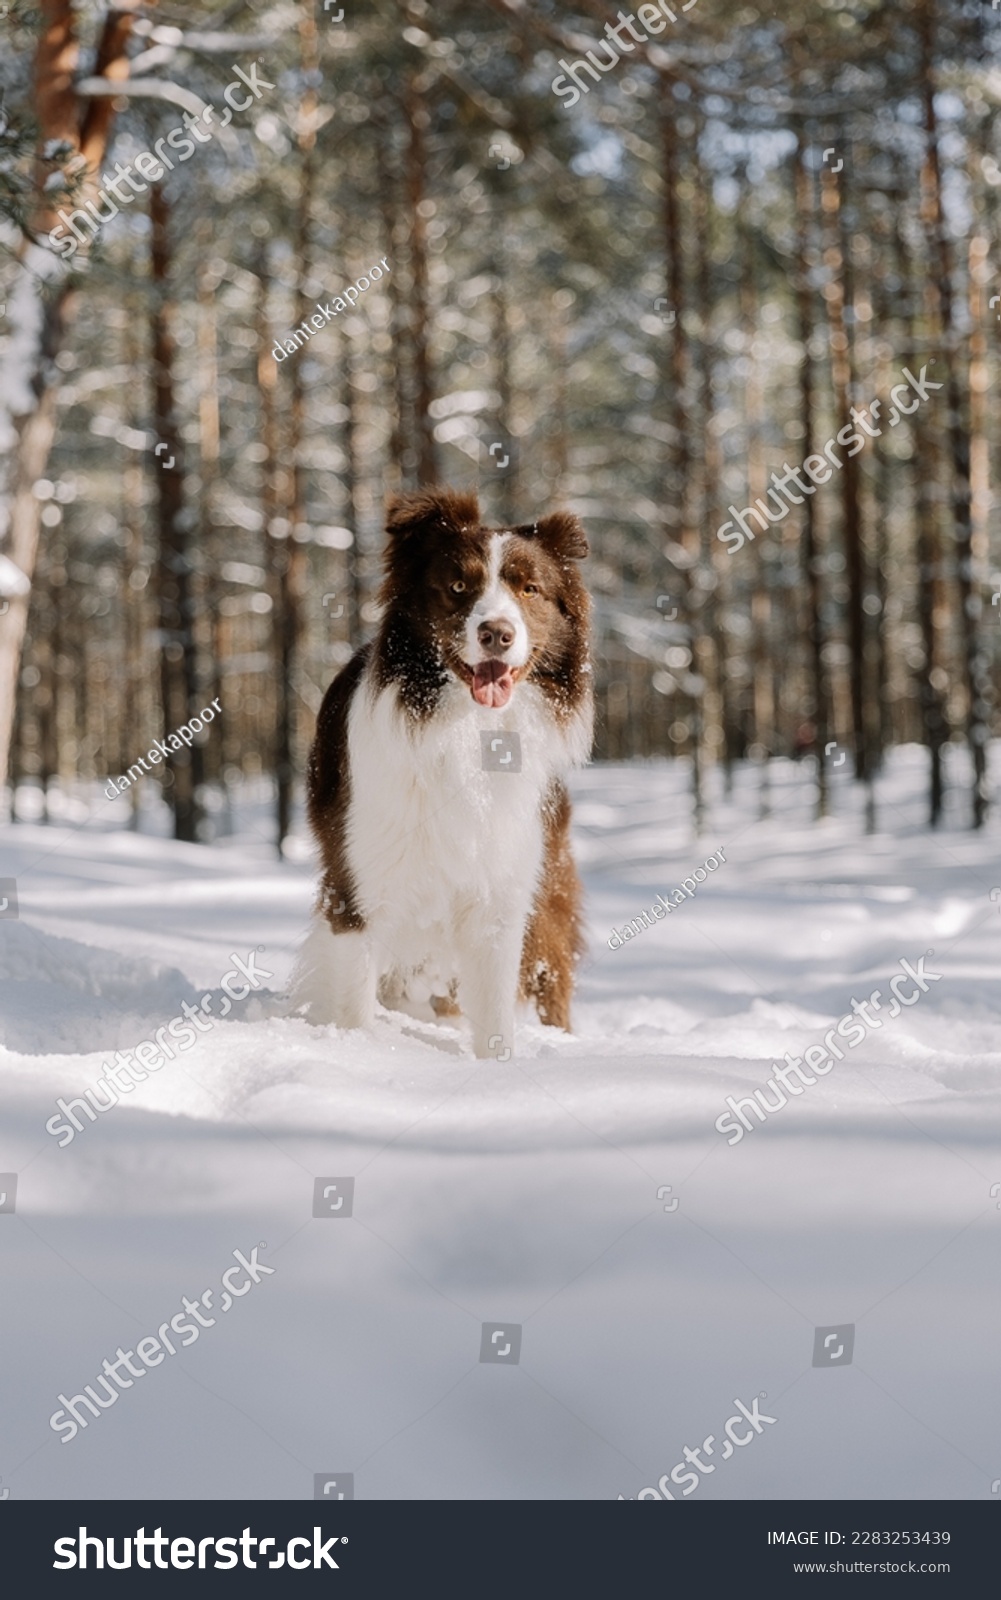 a cute dog playing in snow #2283253439